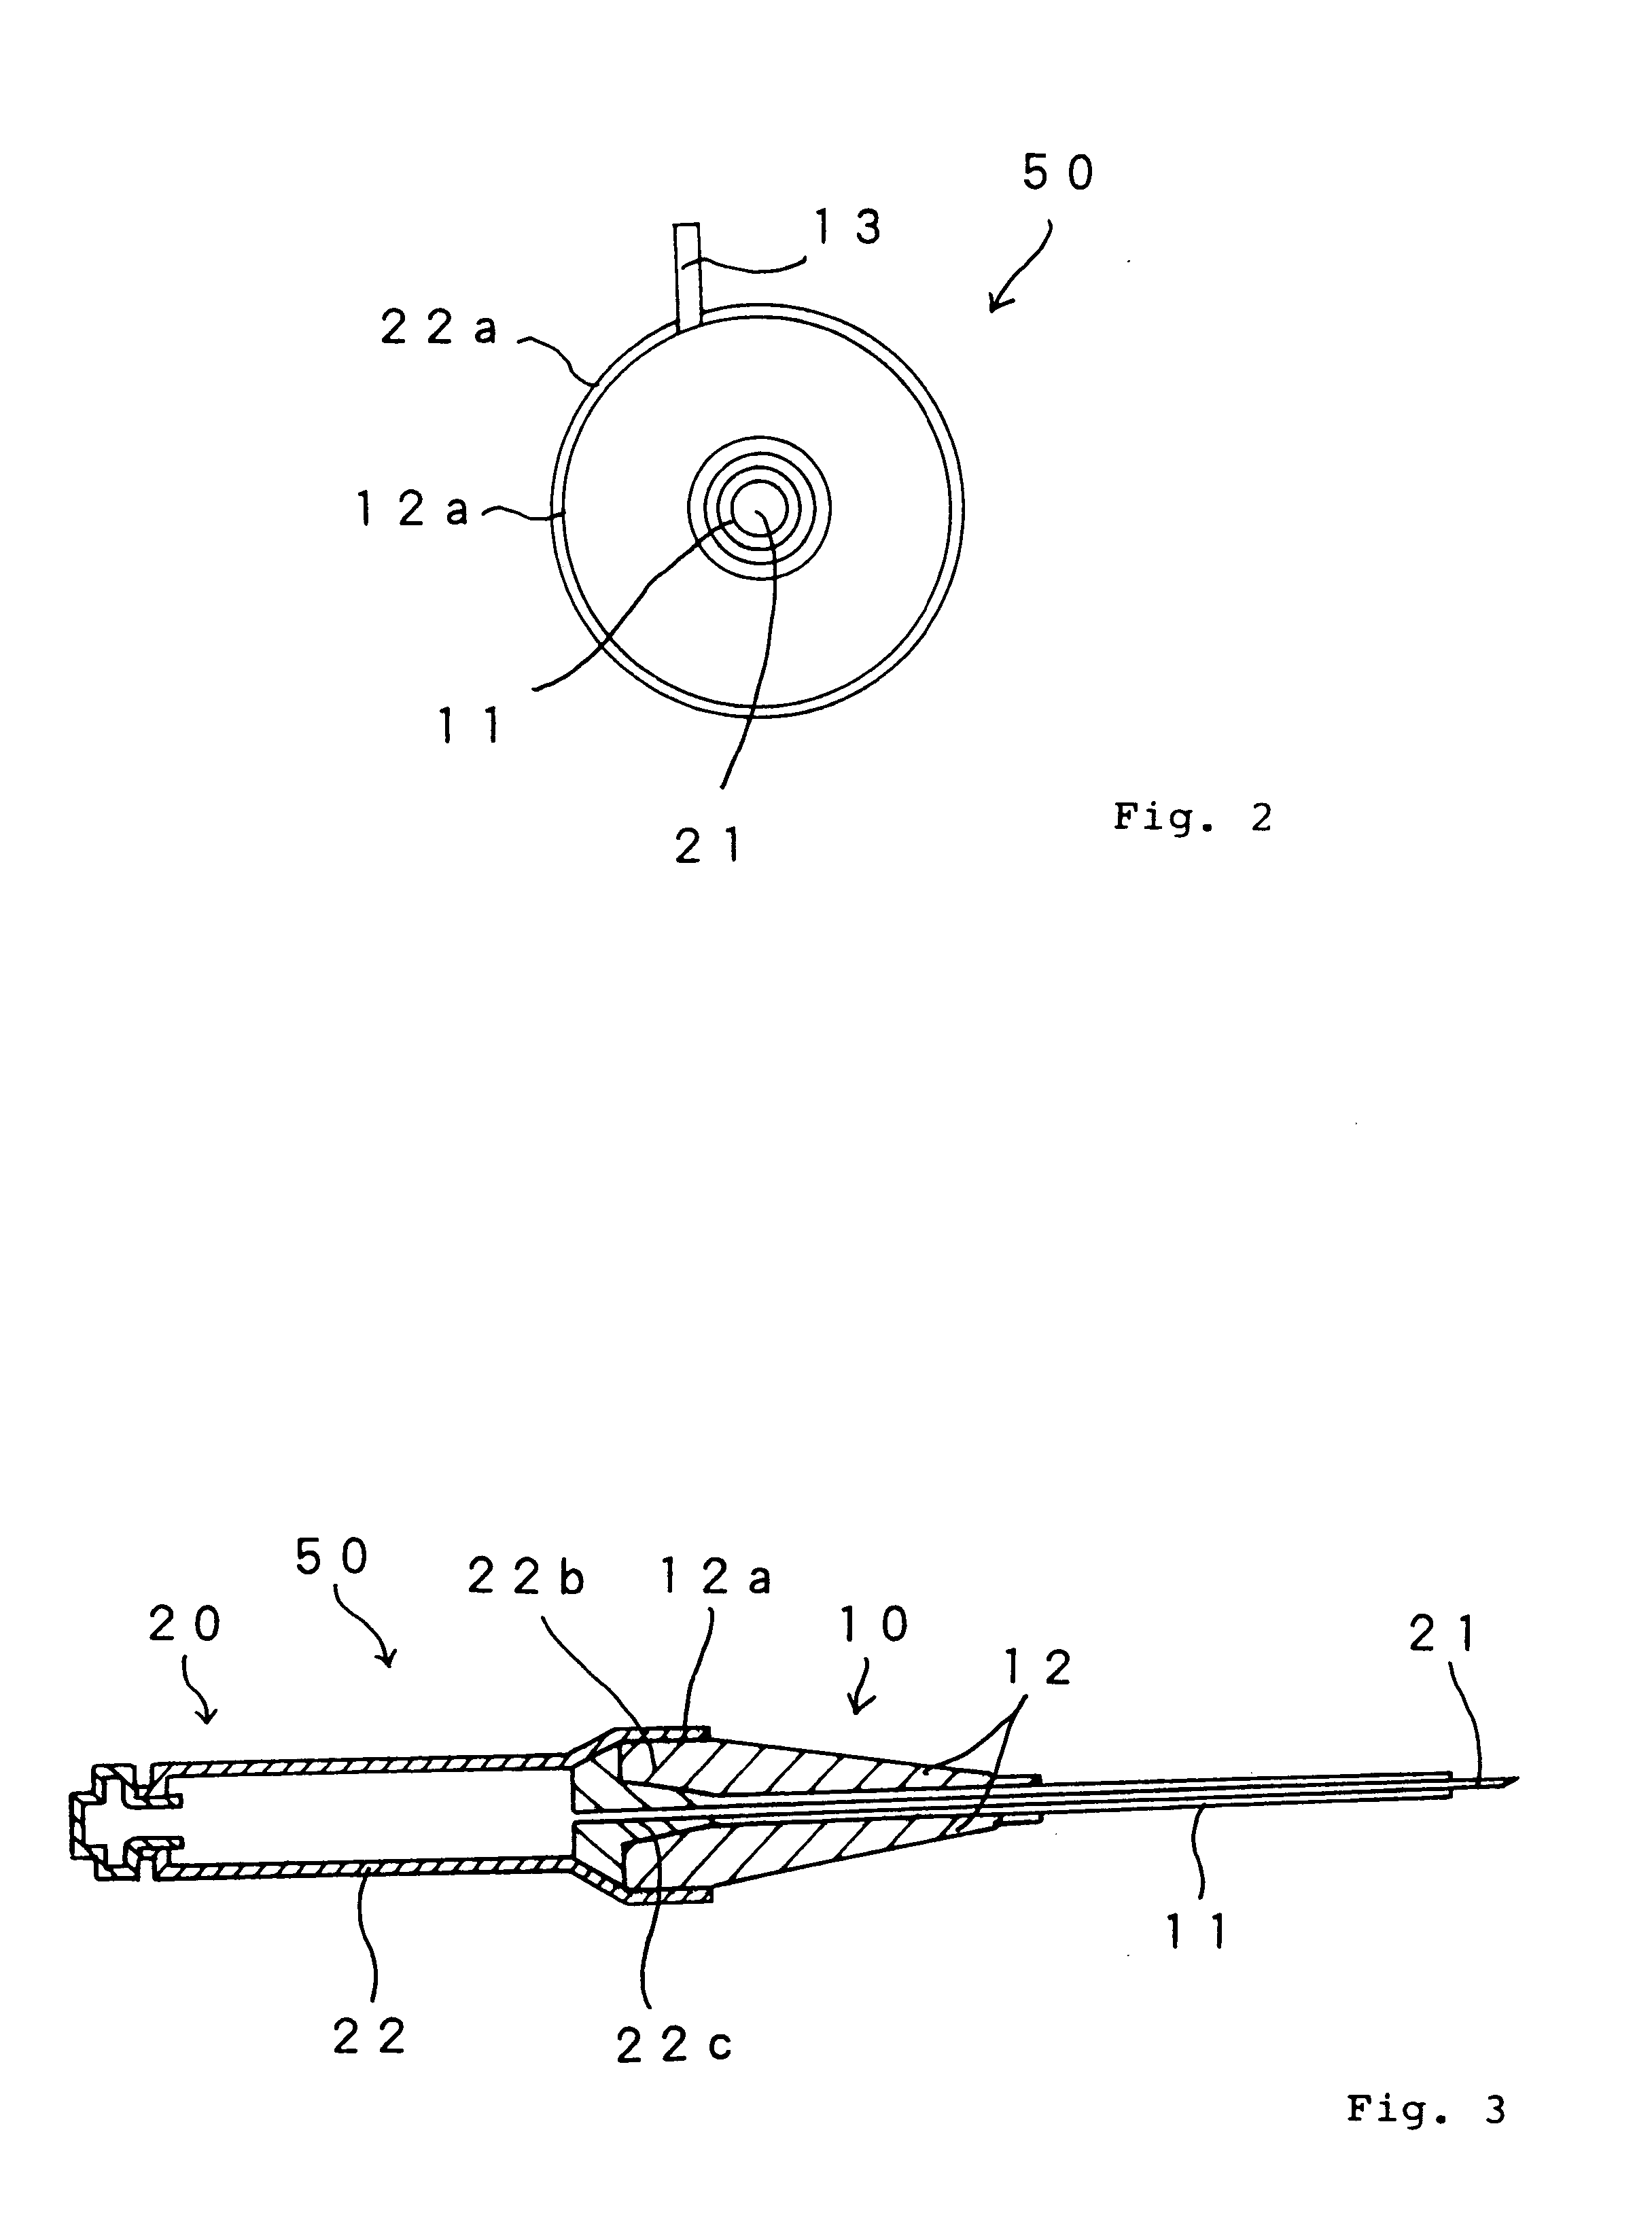 Cannula guide device